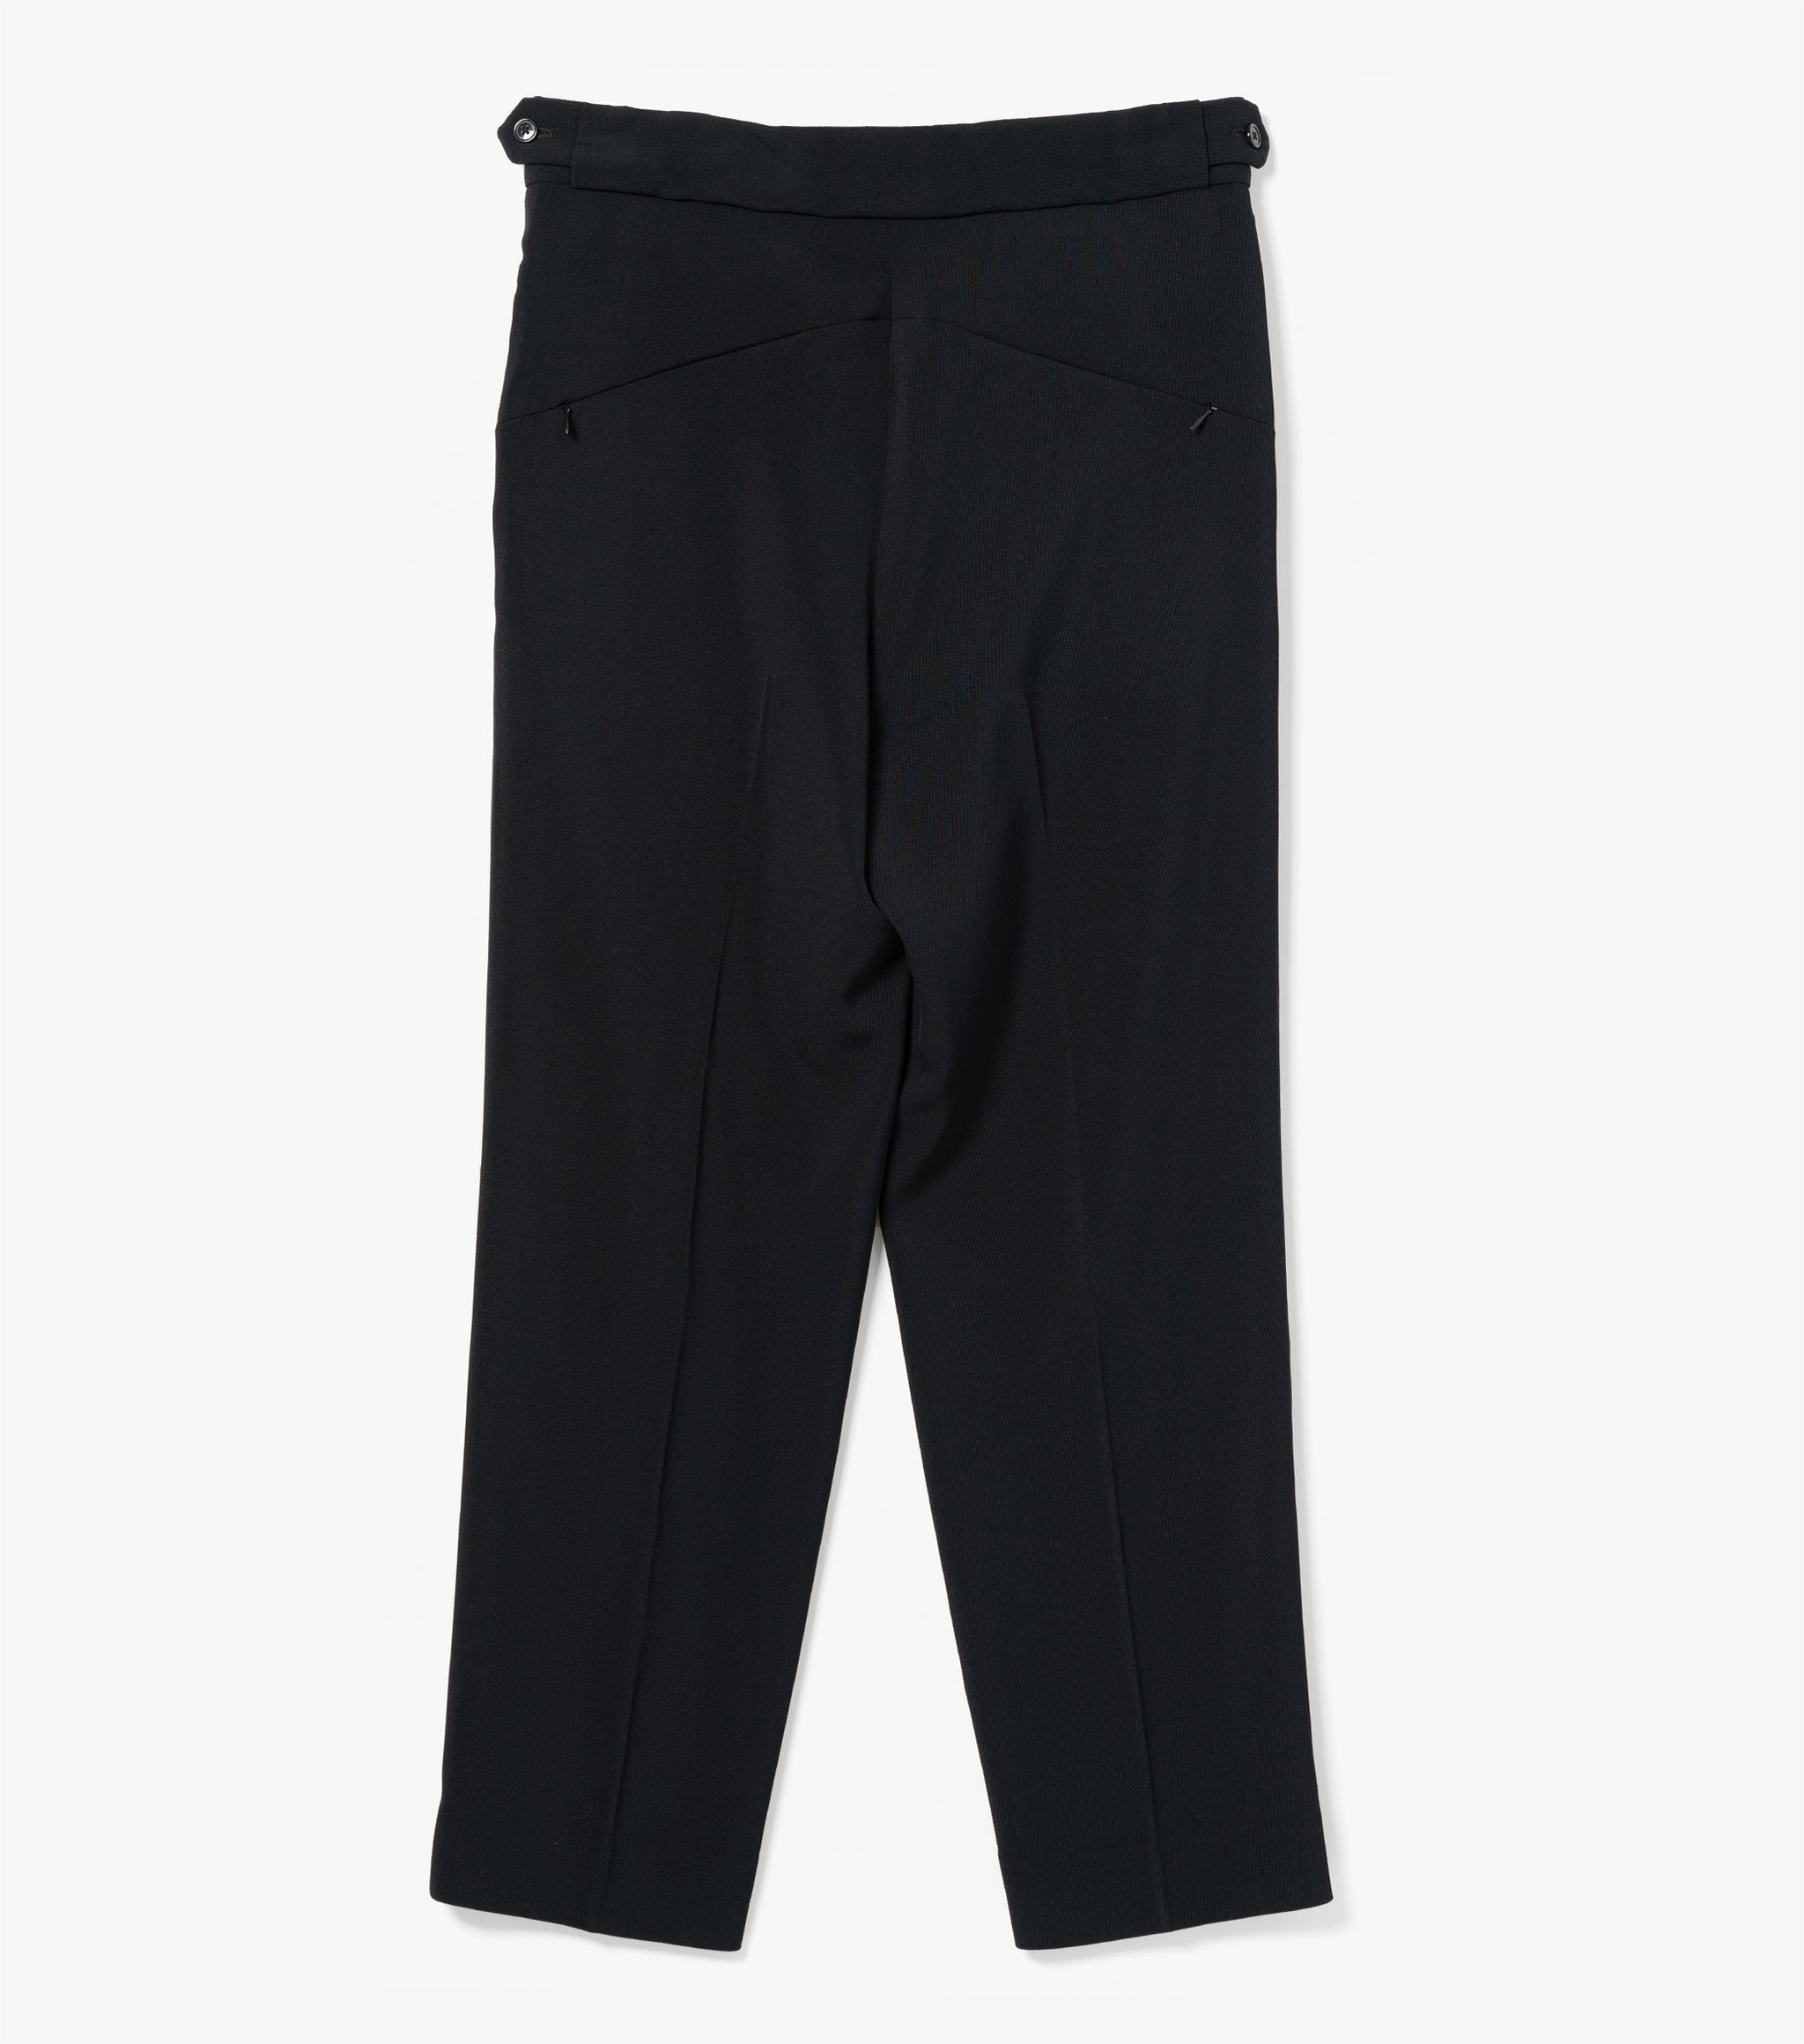 Tucked Side Tab Trouser (Black) – Bows and Arrows